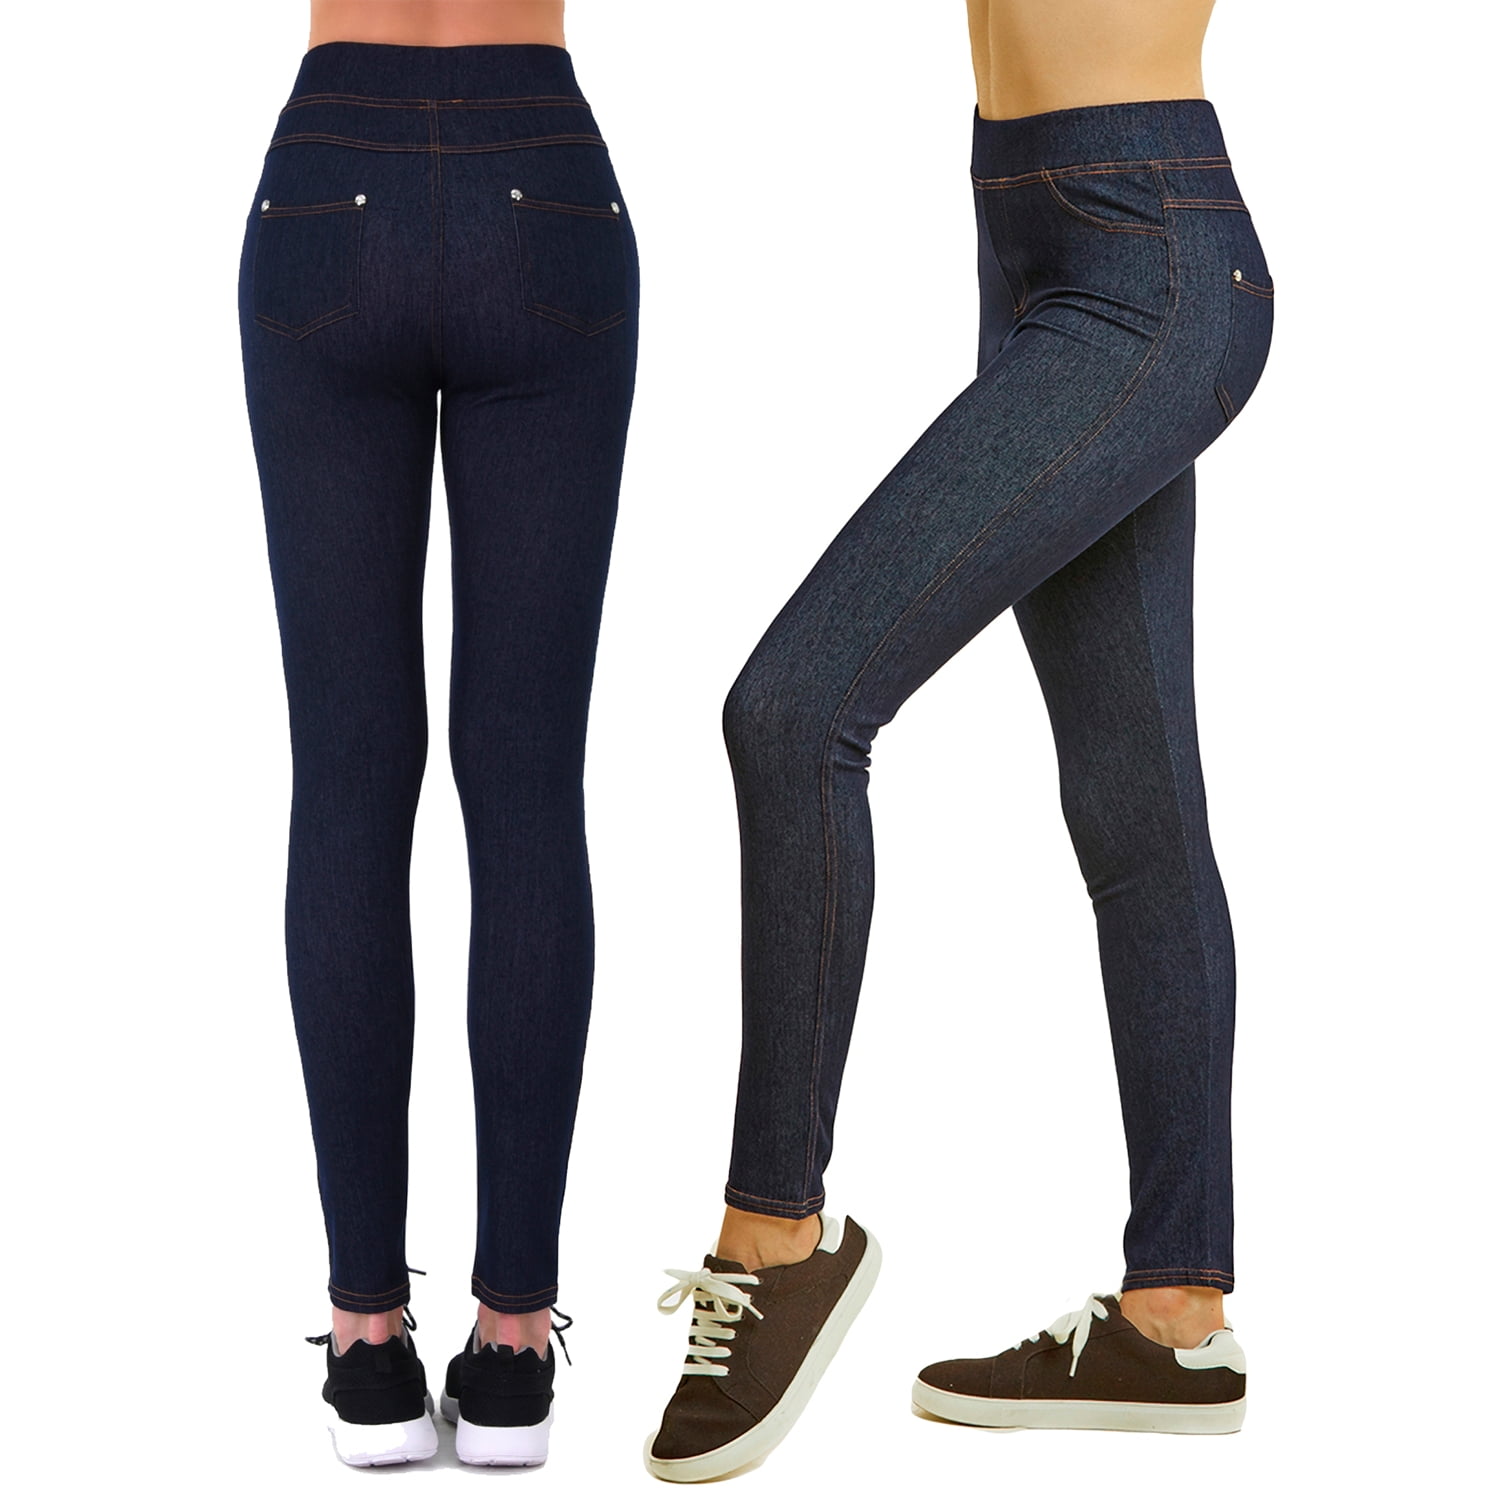 What Is The Back Pocket In Leggings For